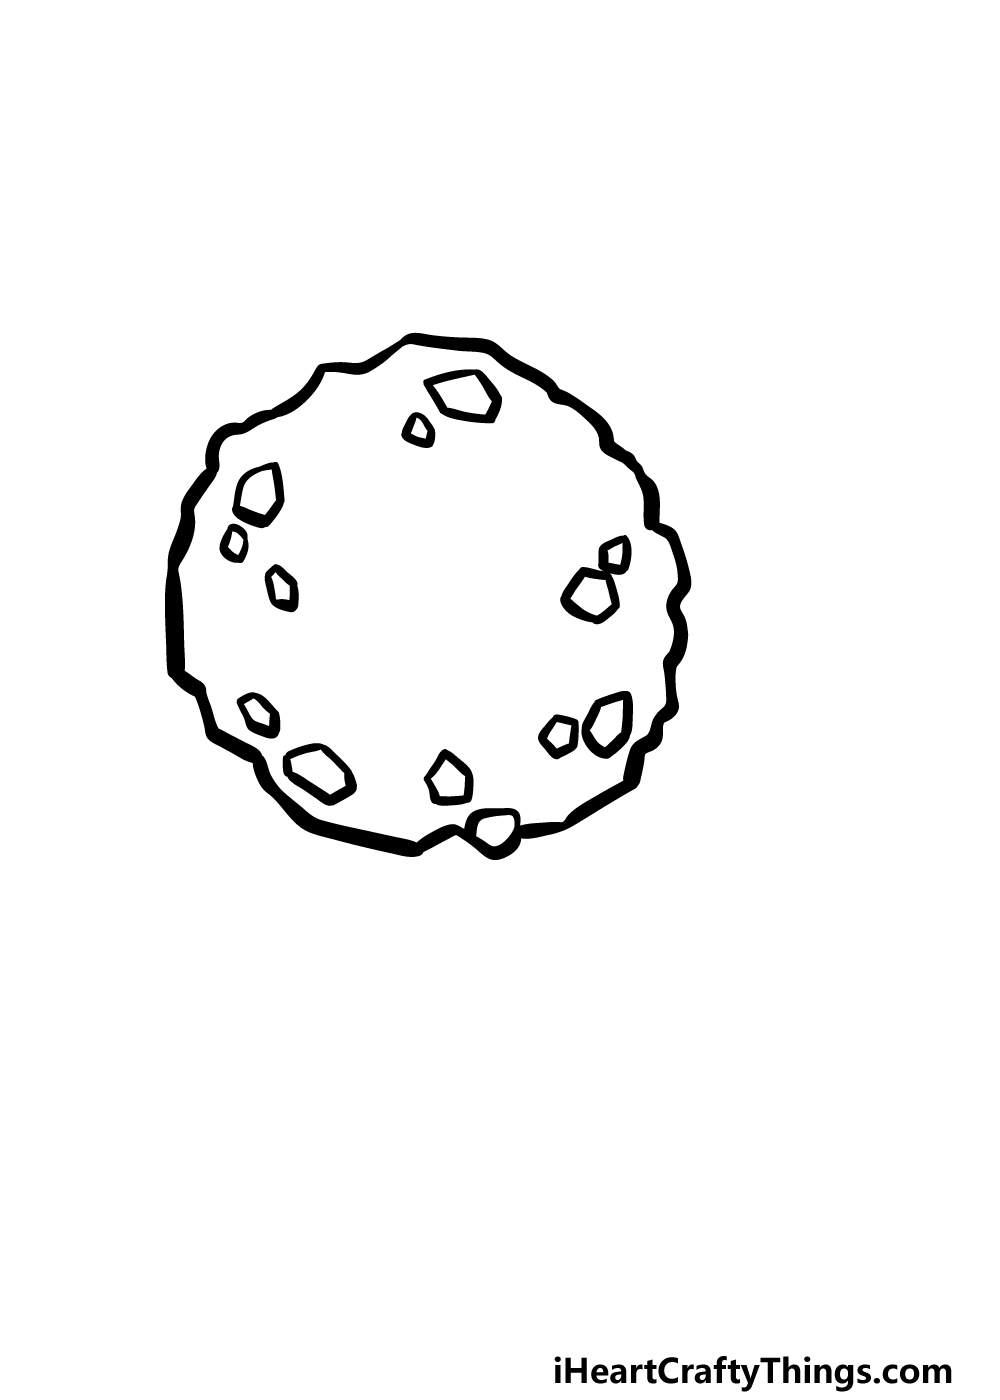 how to draw a cartoon cookie step 2